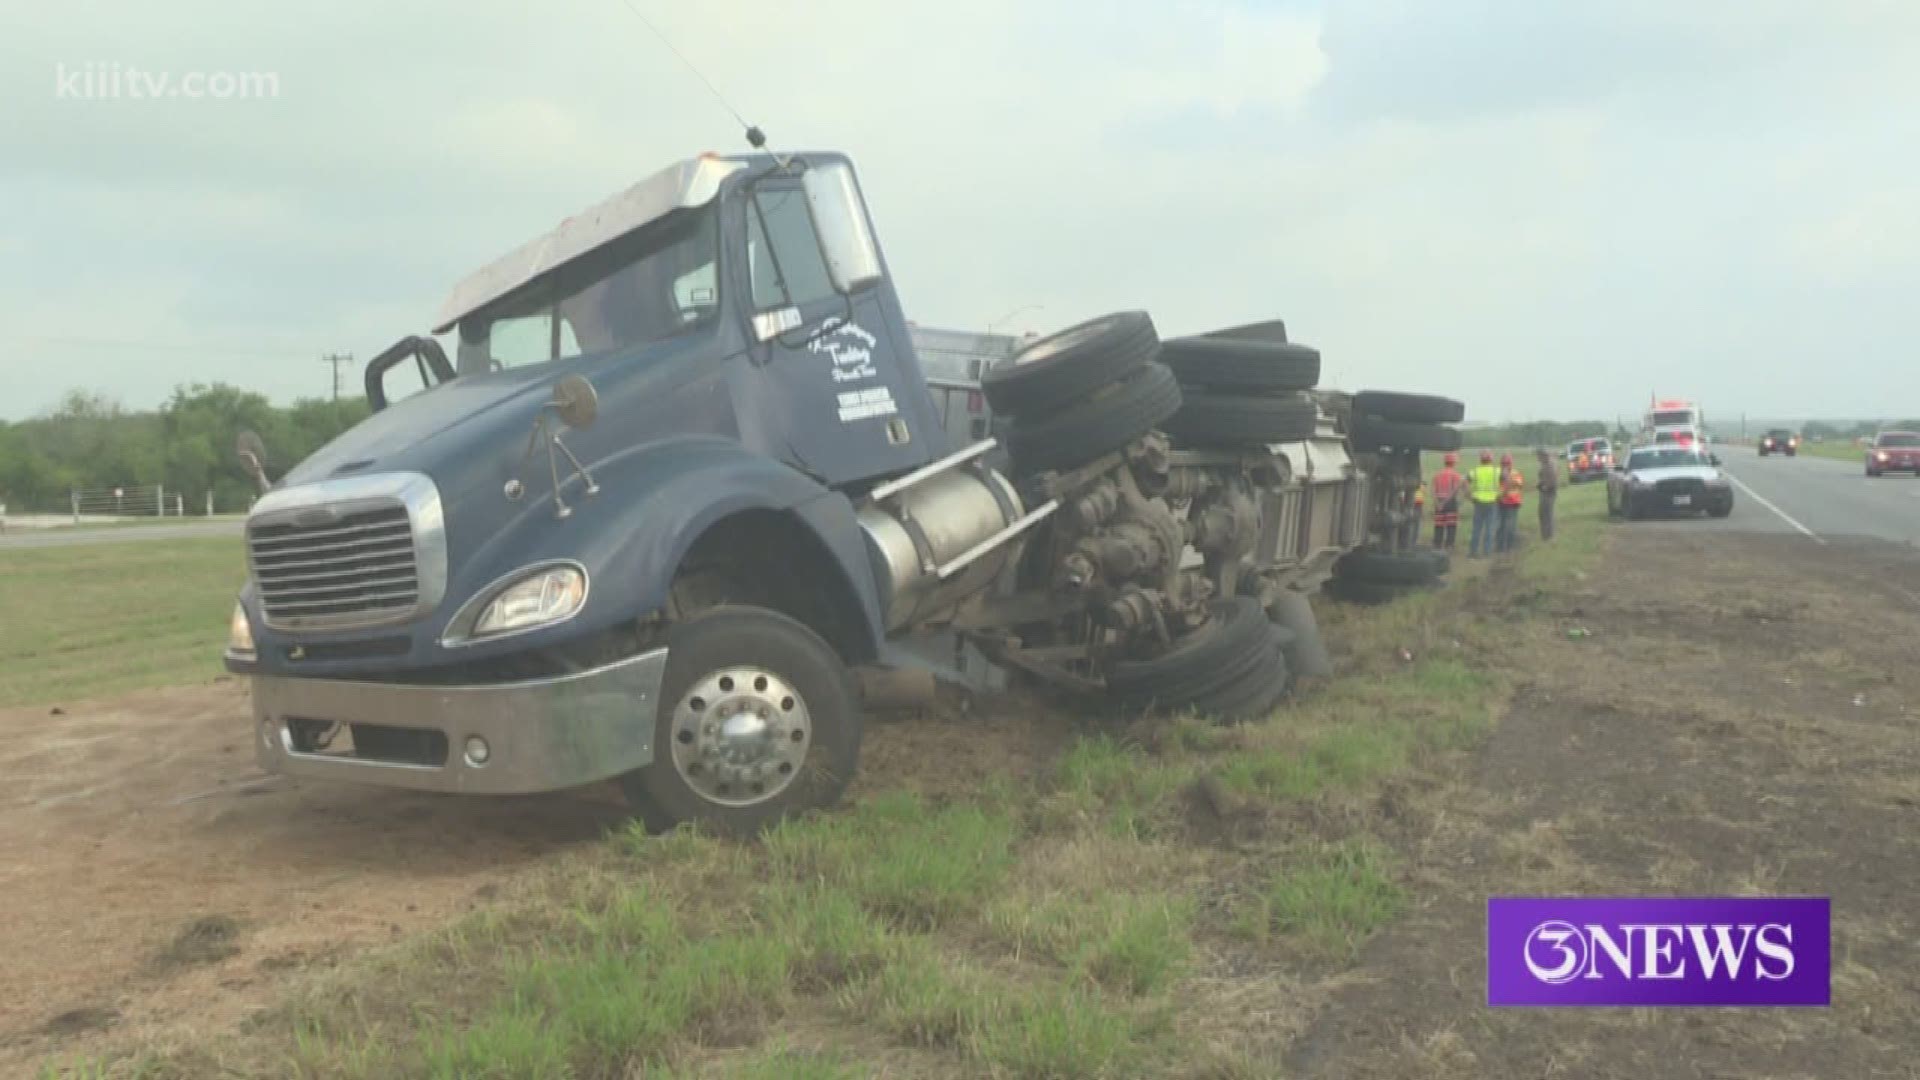 The driver of an 18-wheeler lost a full load of grain Monday morning after falling asleep at the wheel and veering into a ditch along the I-37 feeder road near the Labonte Park area.